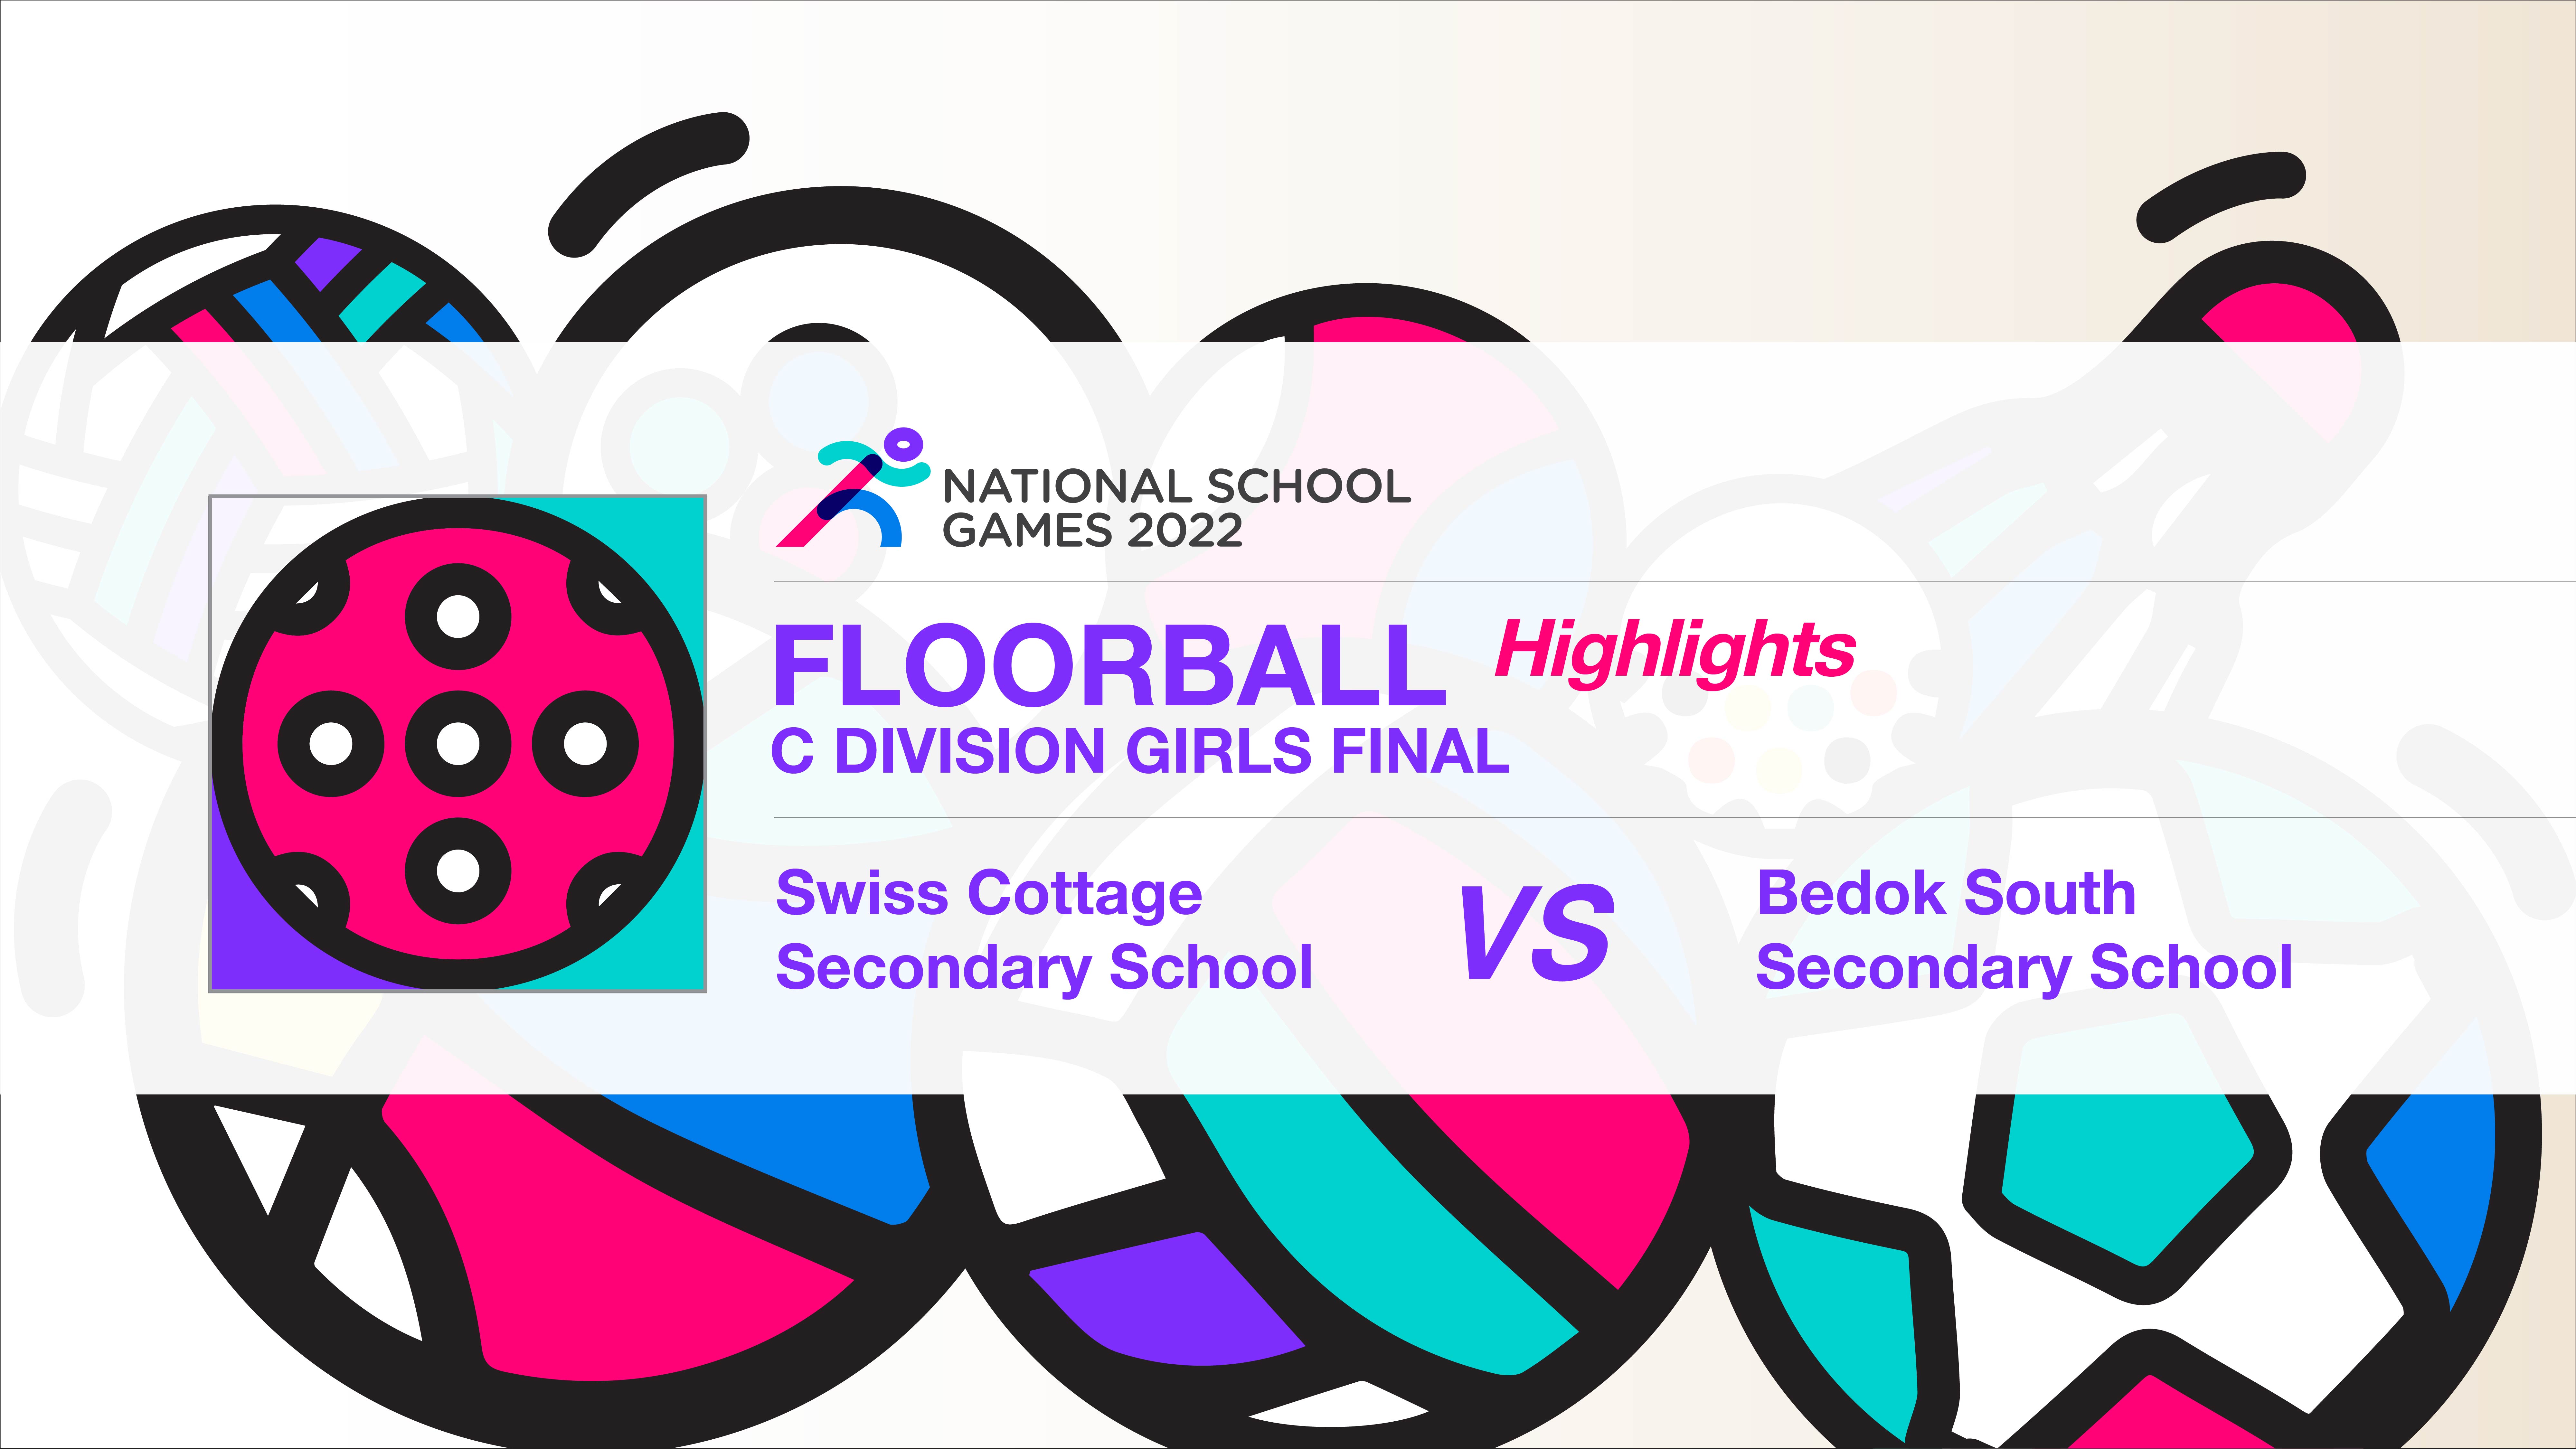 SSSC Floorball National C Division Girls Final | Swiss Cottage Secondary School vs Bedok South Secondary School - Highlights